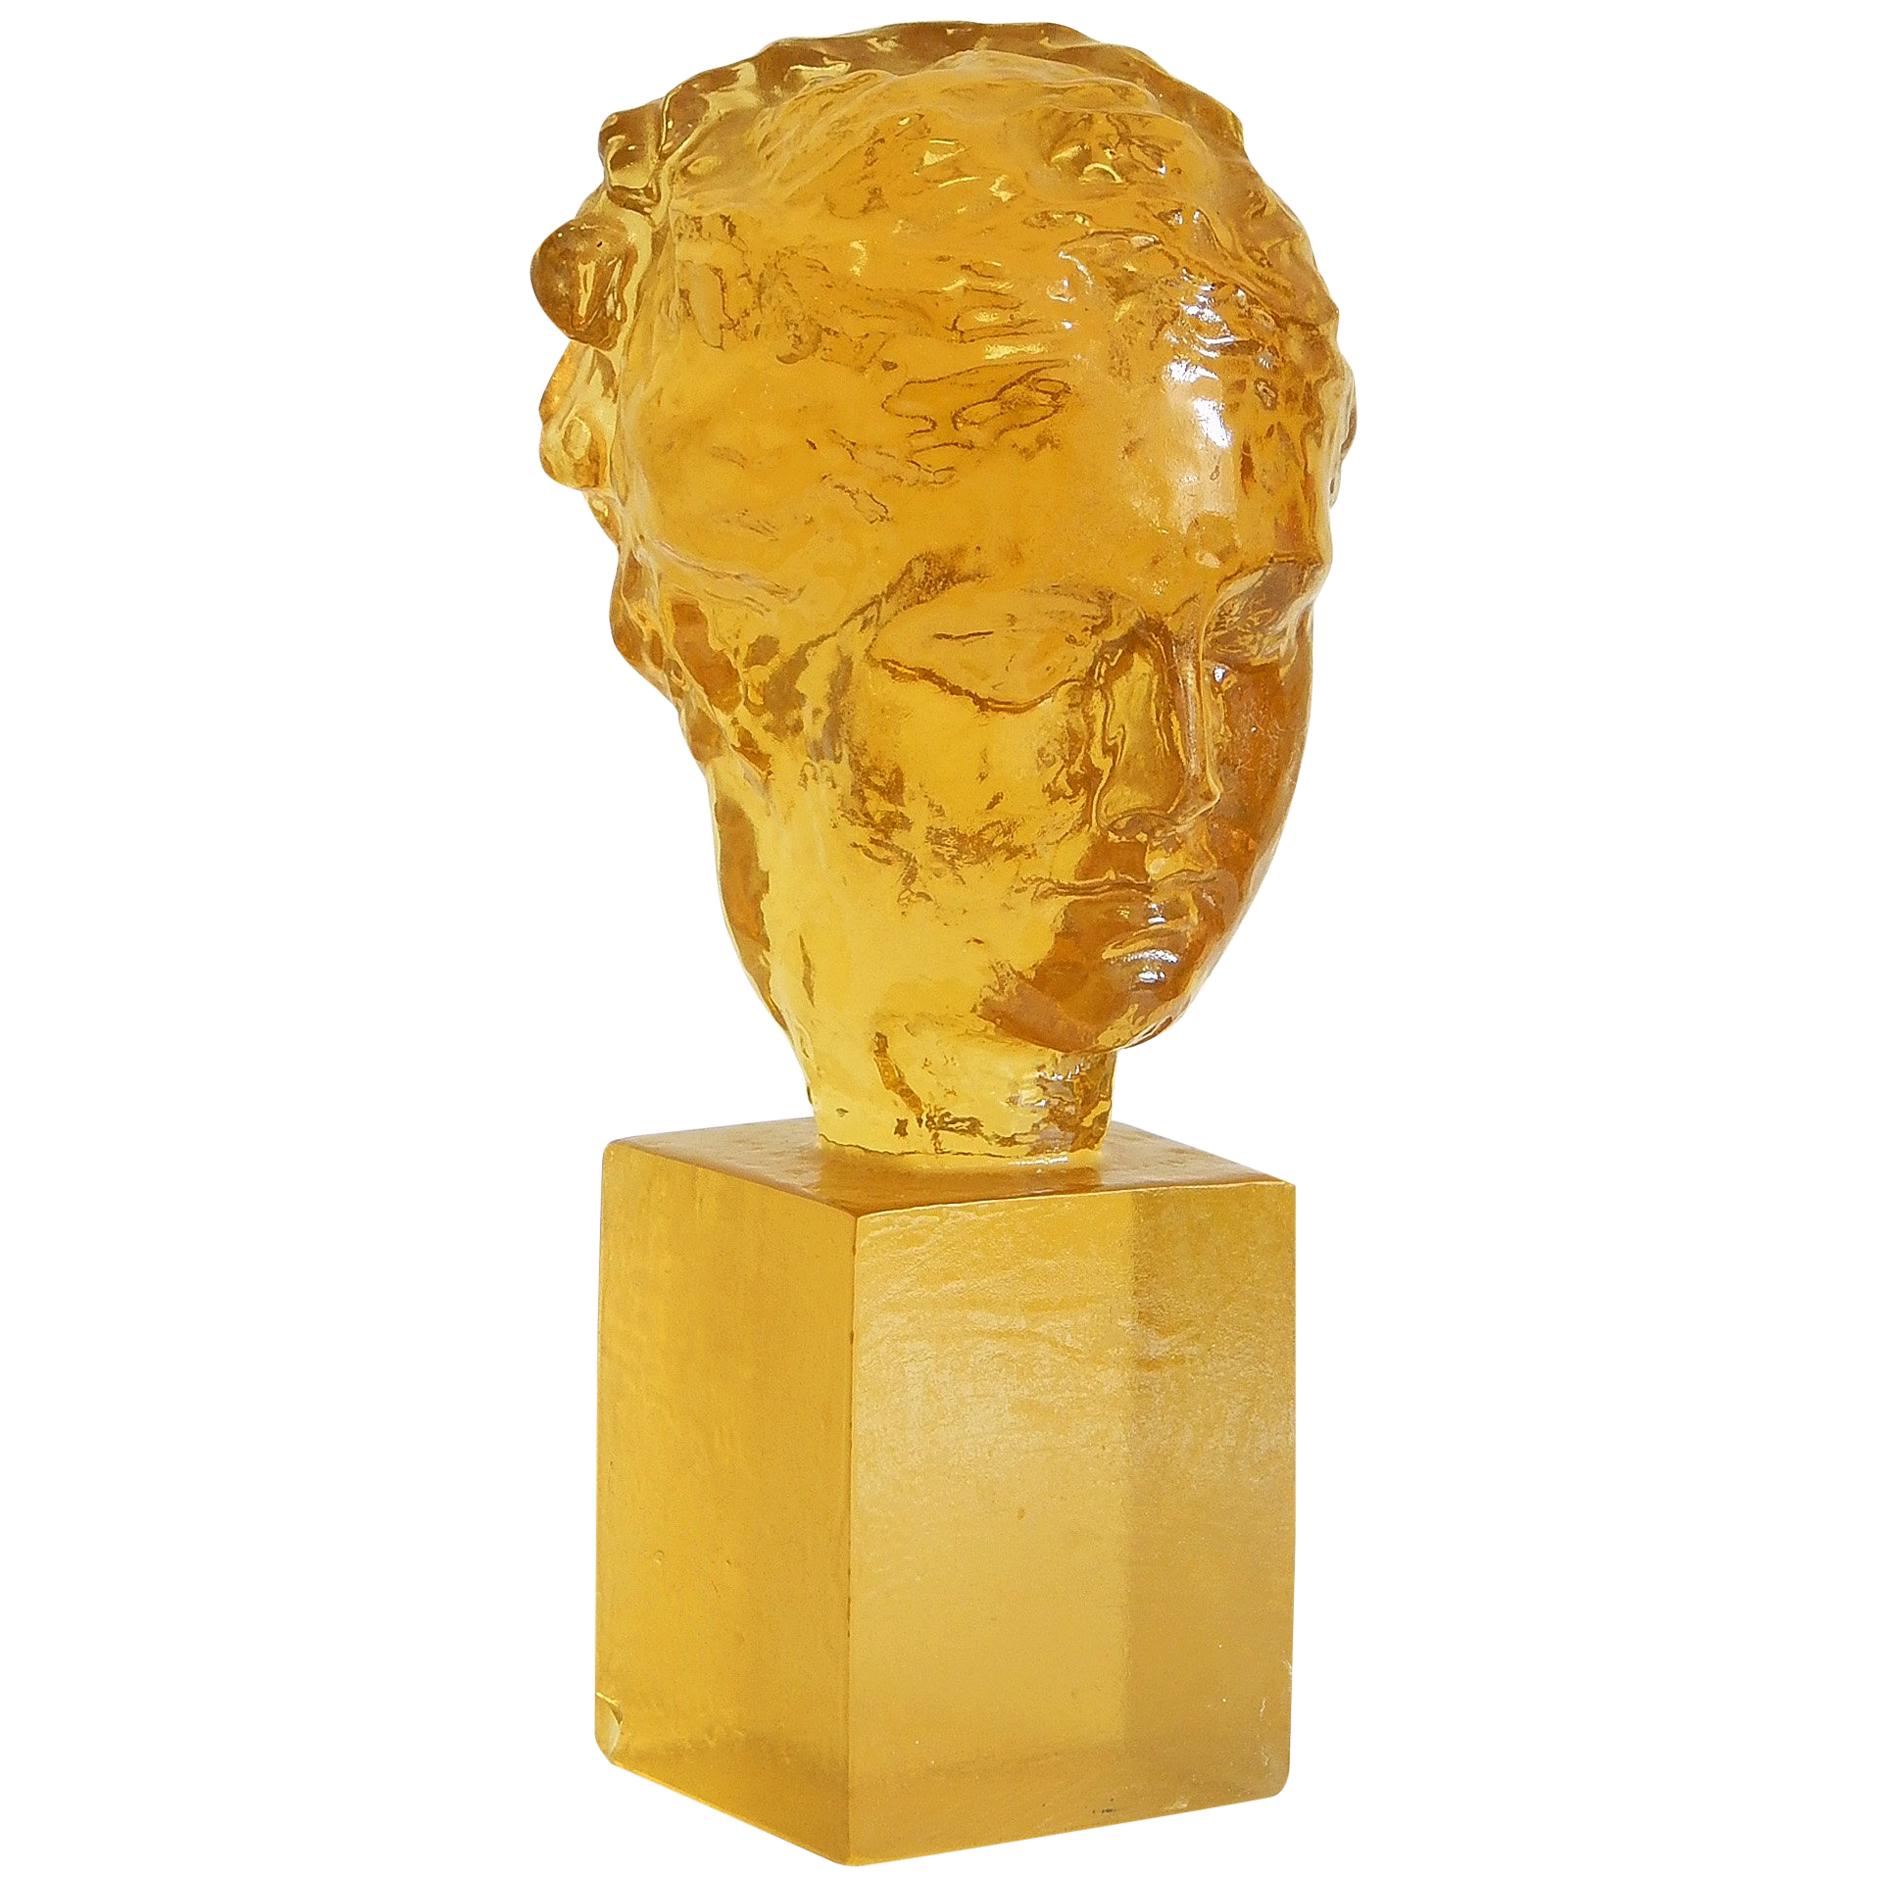 "Female Head in Gold, " Rare Sculpture in a Golden Amber Hue by Dorothy Thorpe